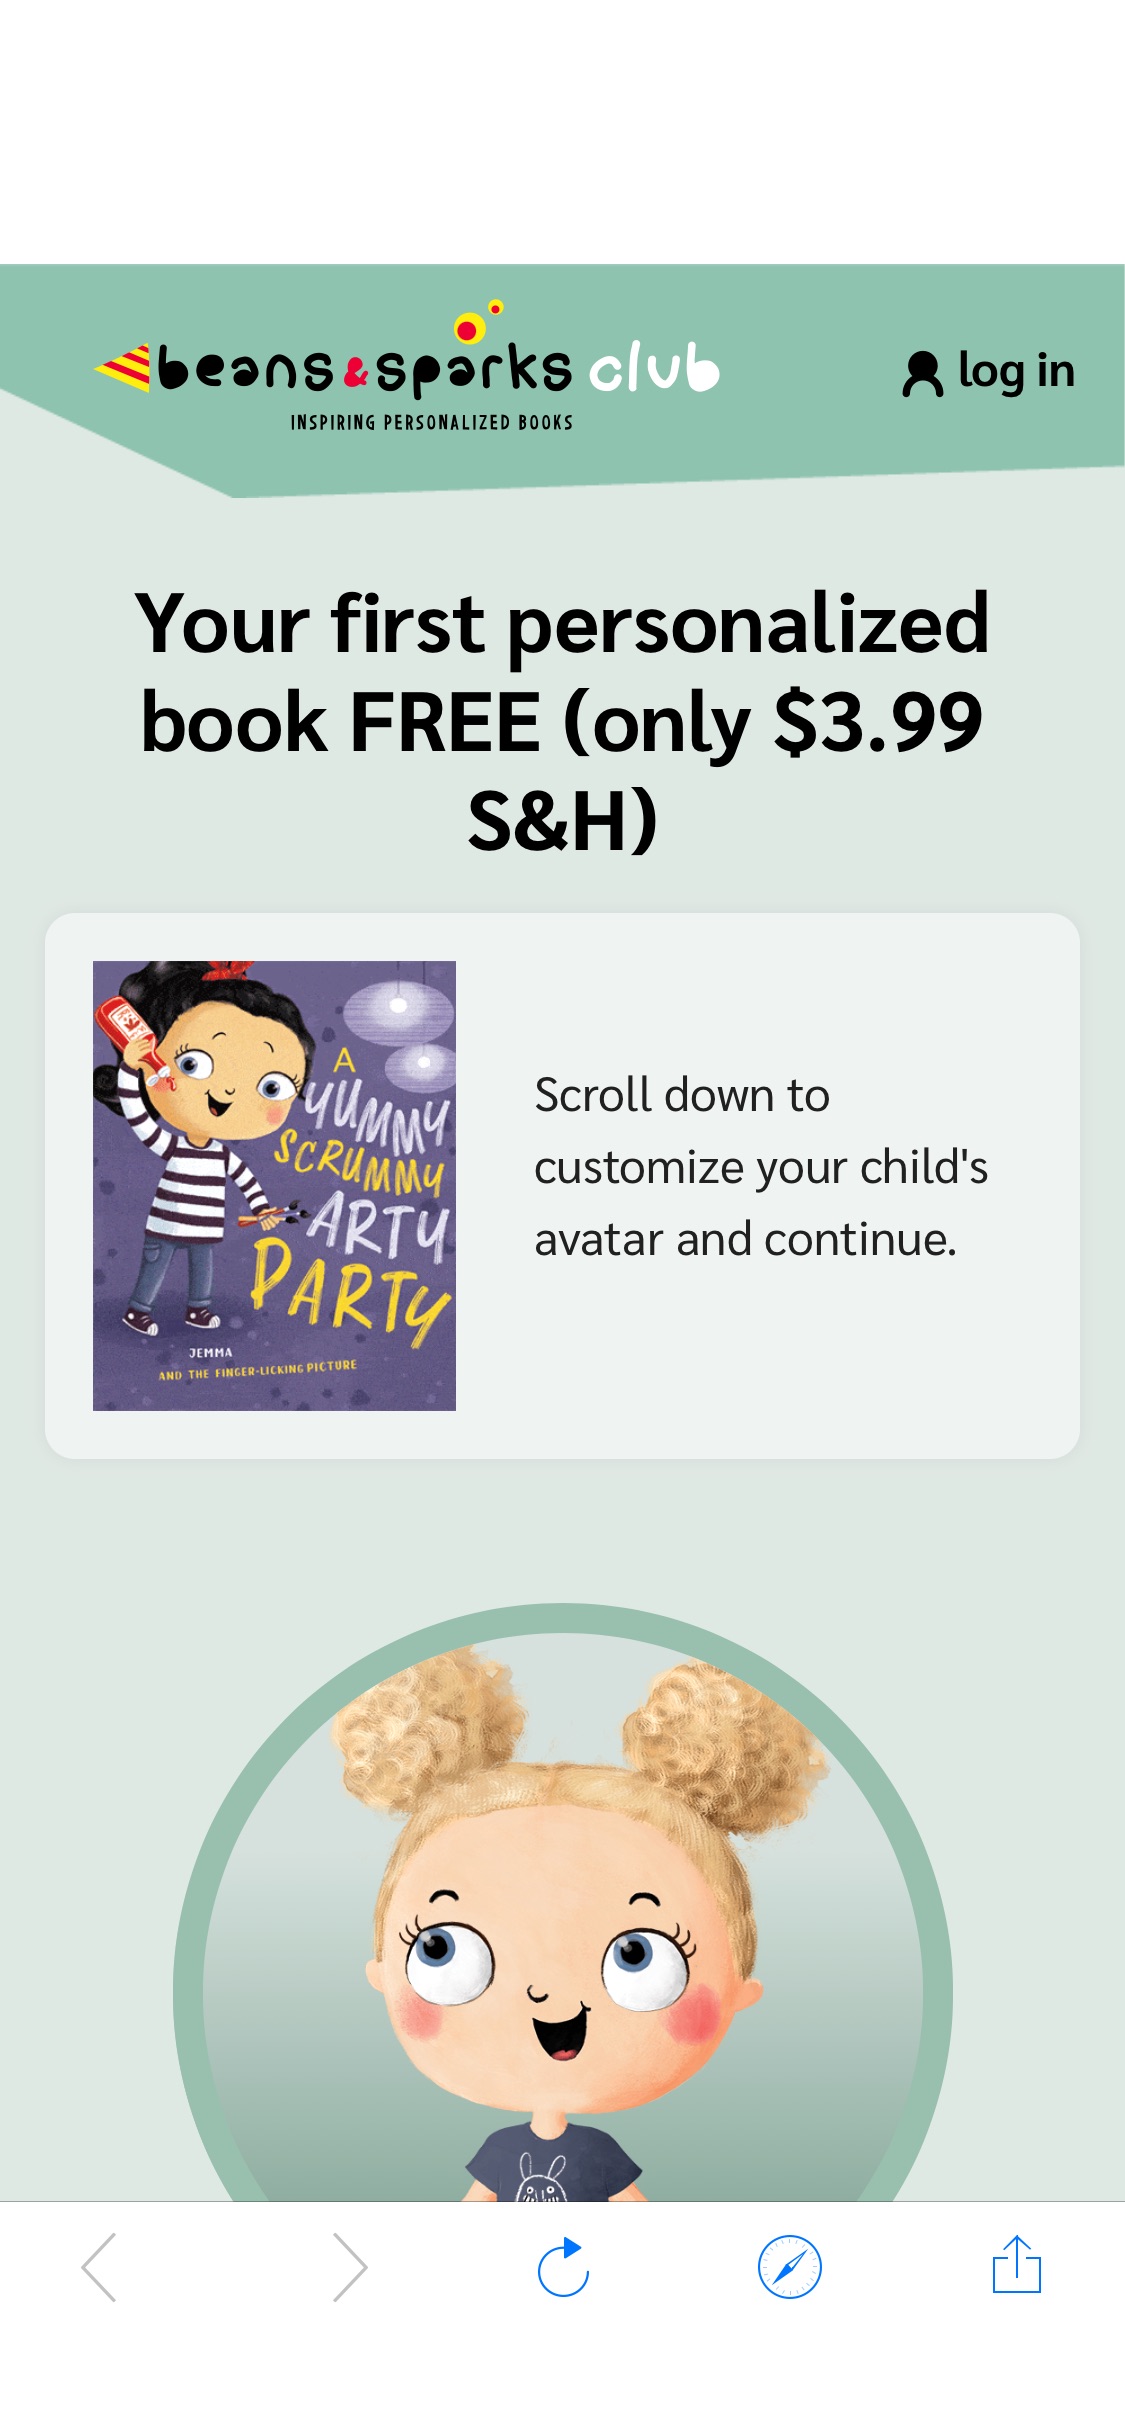 beans&sparks club - Create a book with your child as a hero 免费书和贴纸